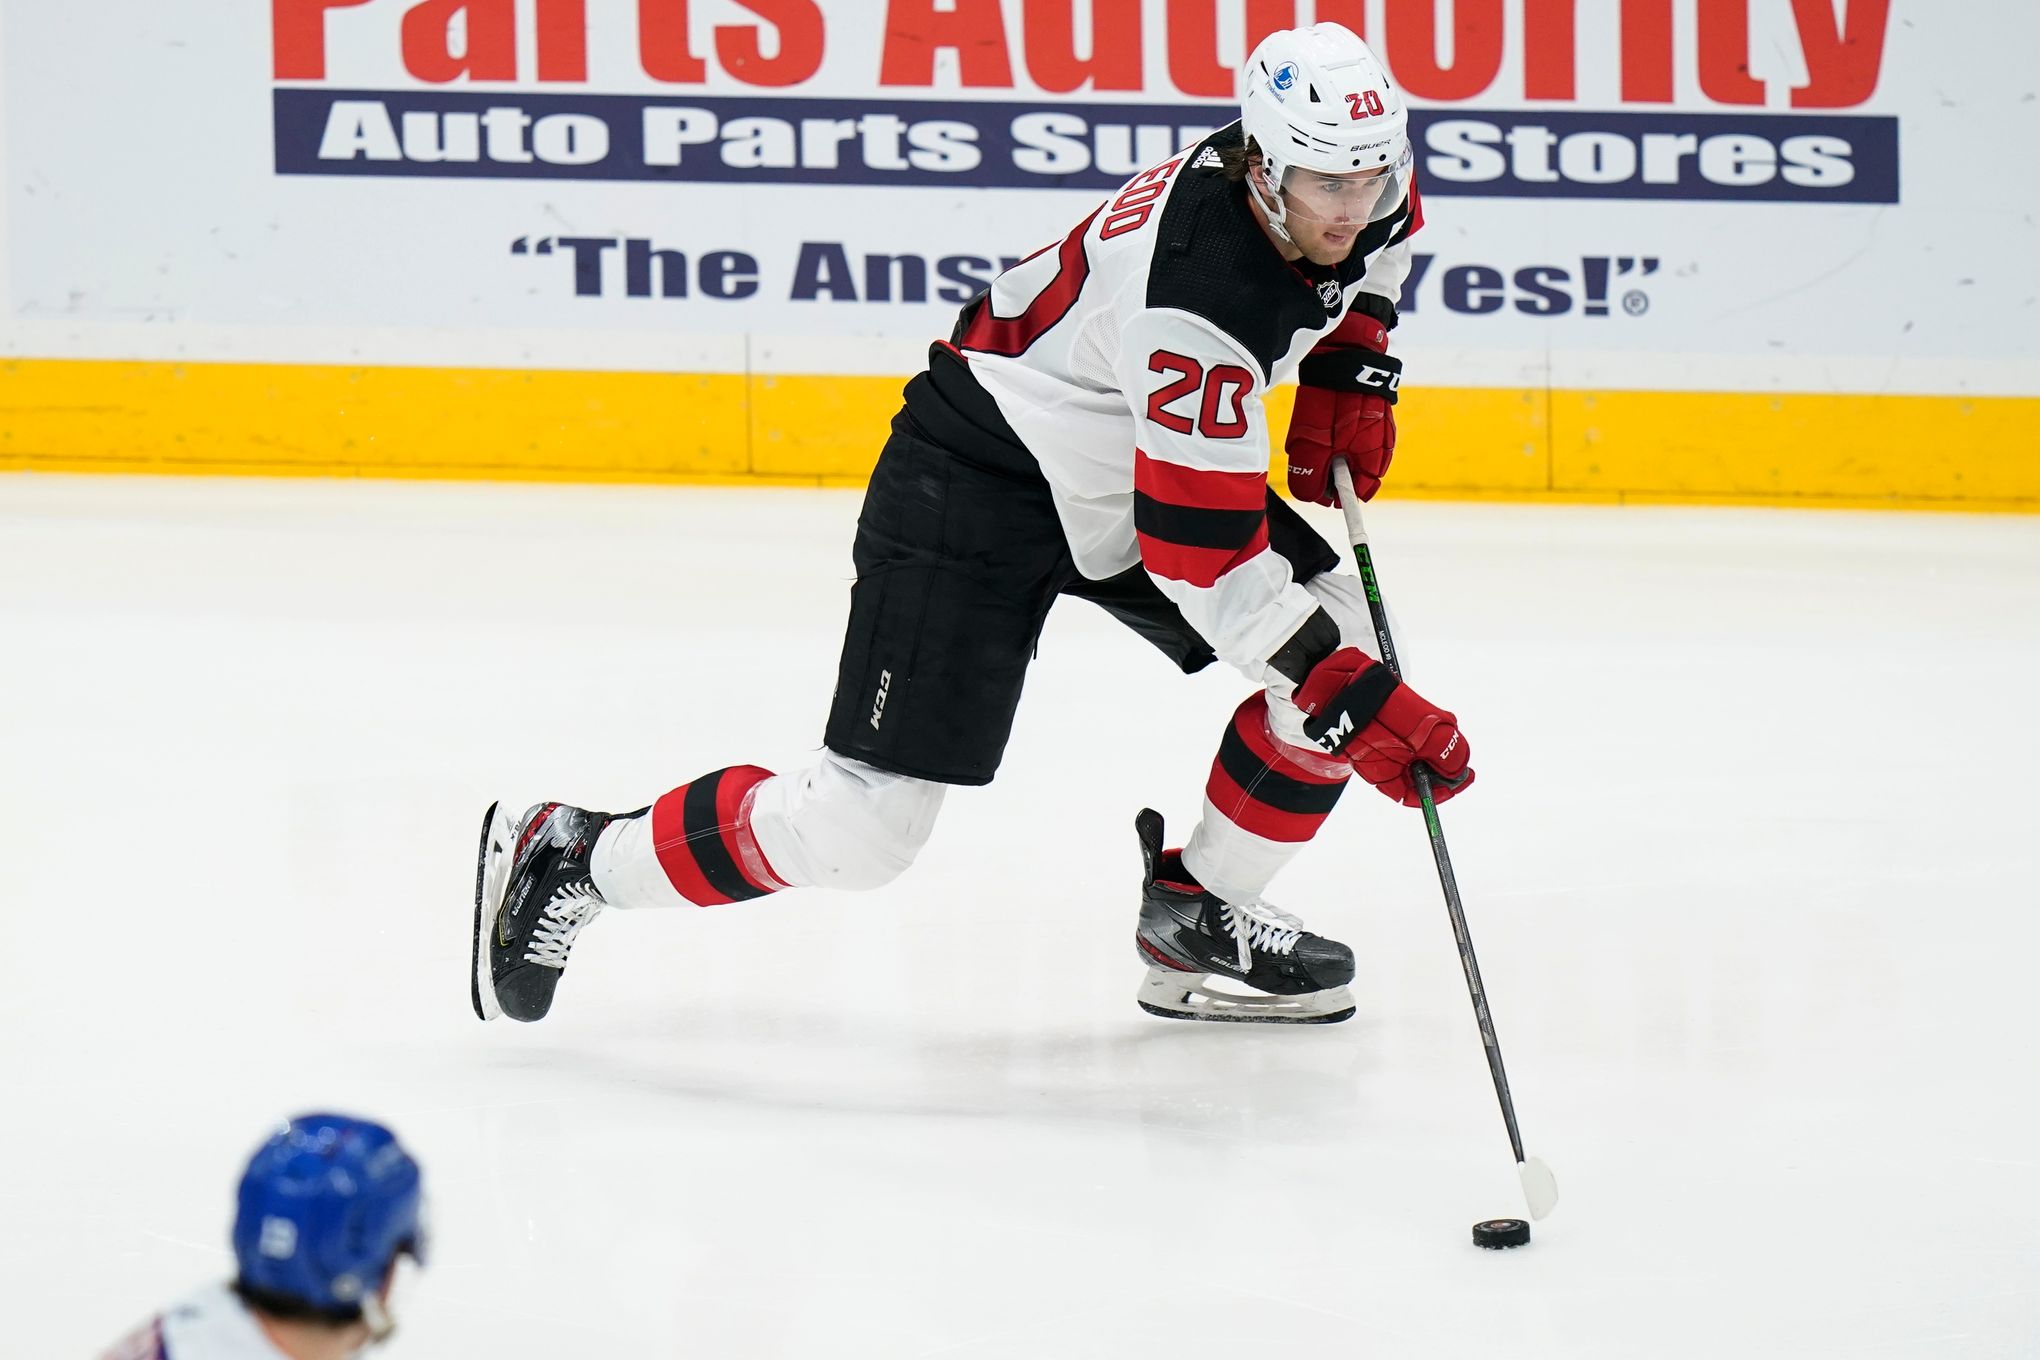 AHL Weekly: A devil of a start in Lowell